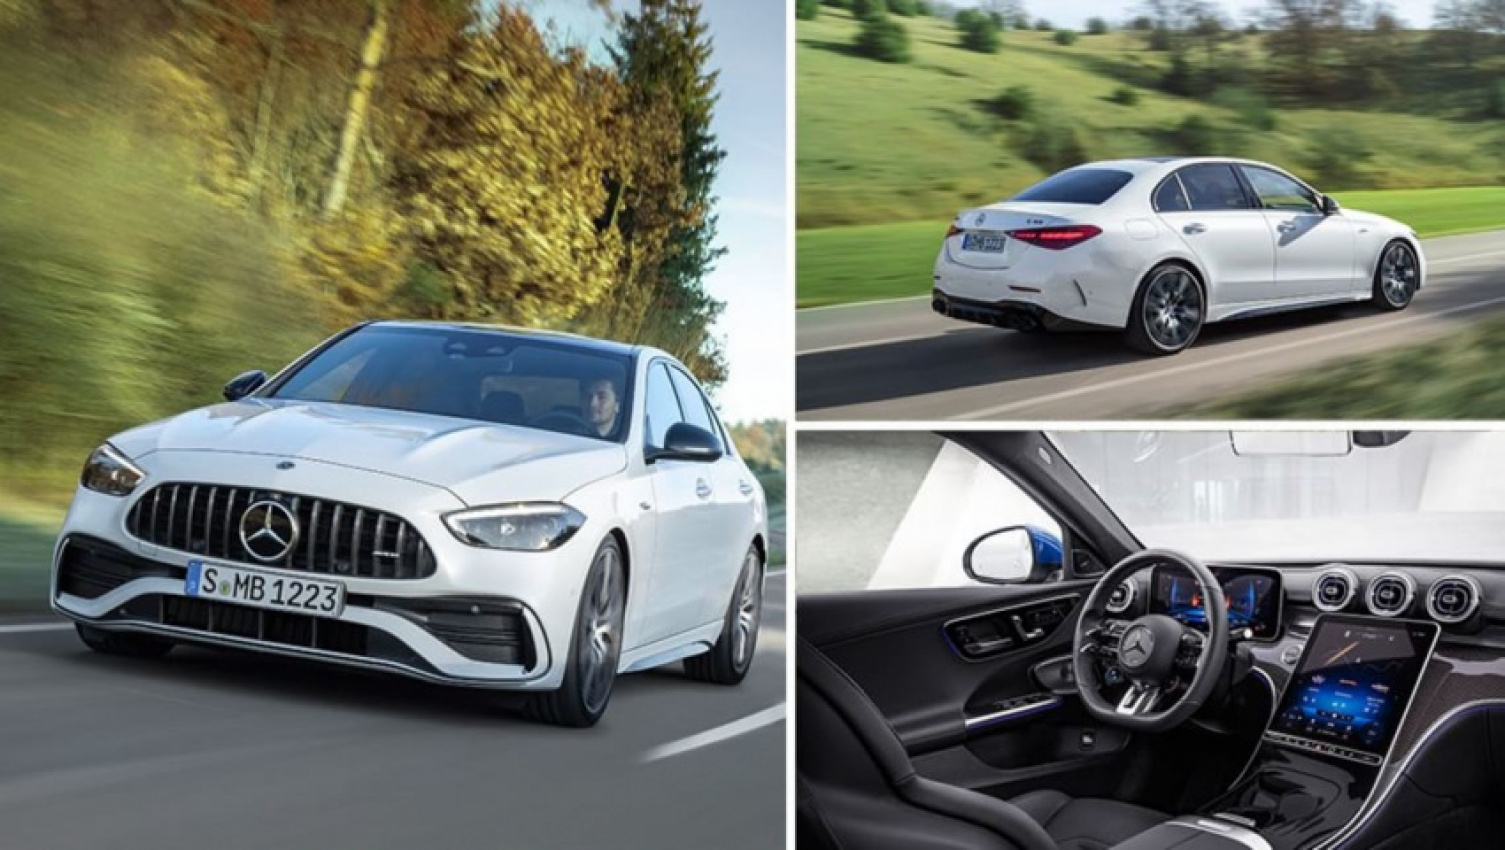 audi, autos, bmw, cars, genesis, mercedes-benz, mg, audi s4, bmw m3, genesis g70, industry news, mercedes, mercedes-benz c-class, mercedes-benz c-class 2022, mercedes-benz news, mercedes-benz sedan range, mercedes-benz wagon range, showroom news, 2023 mercedes-amg c43 detailed: more power, less cylinders for latest bmw m340i, genesis g70 sport and audi s4 avant rival